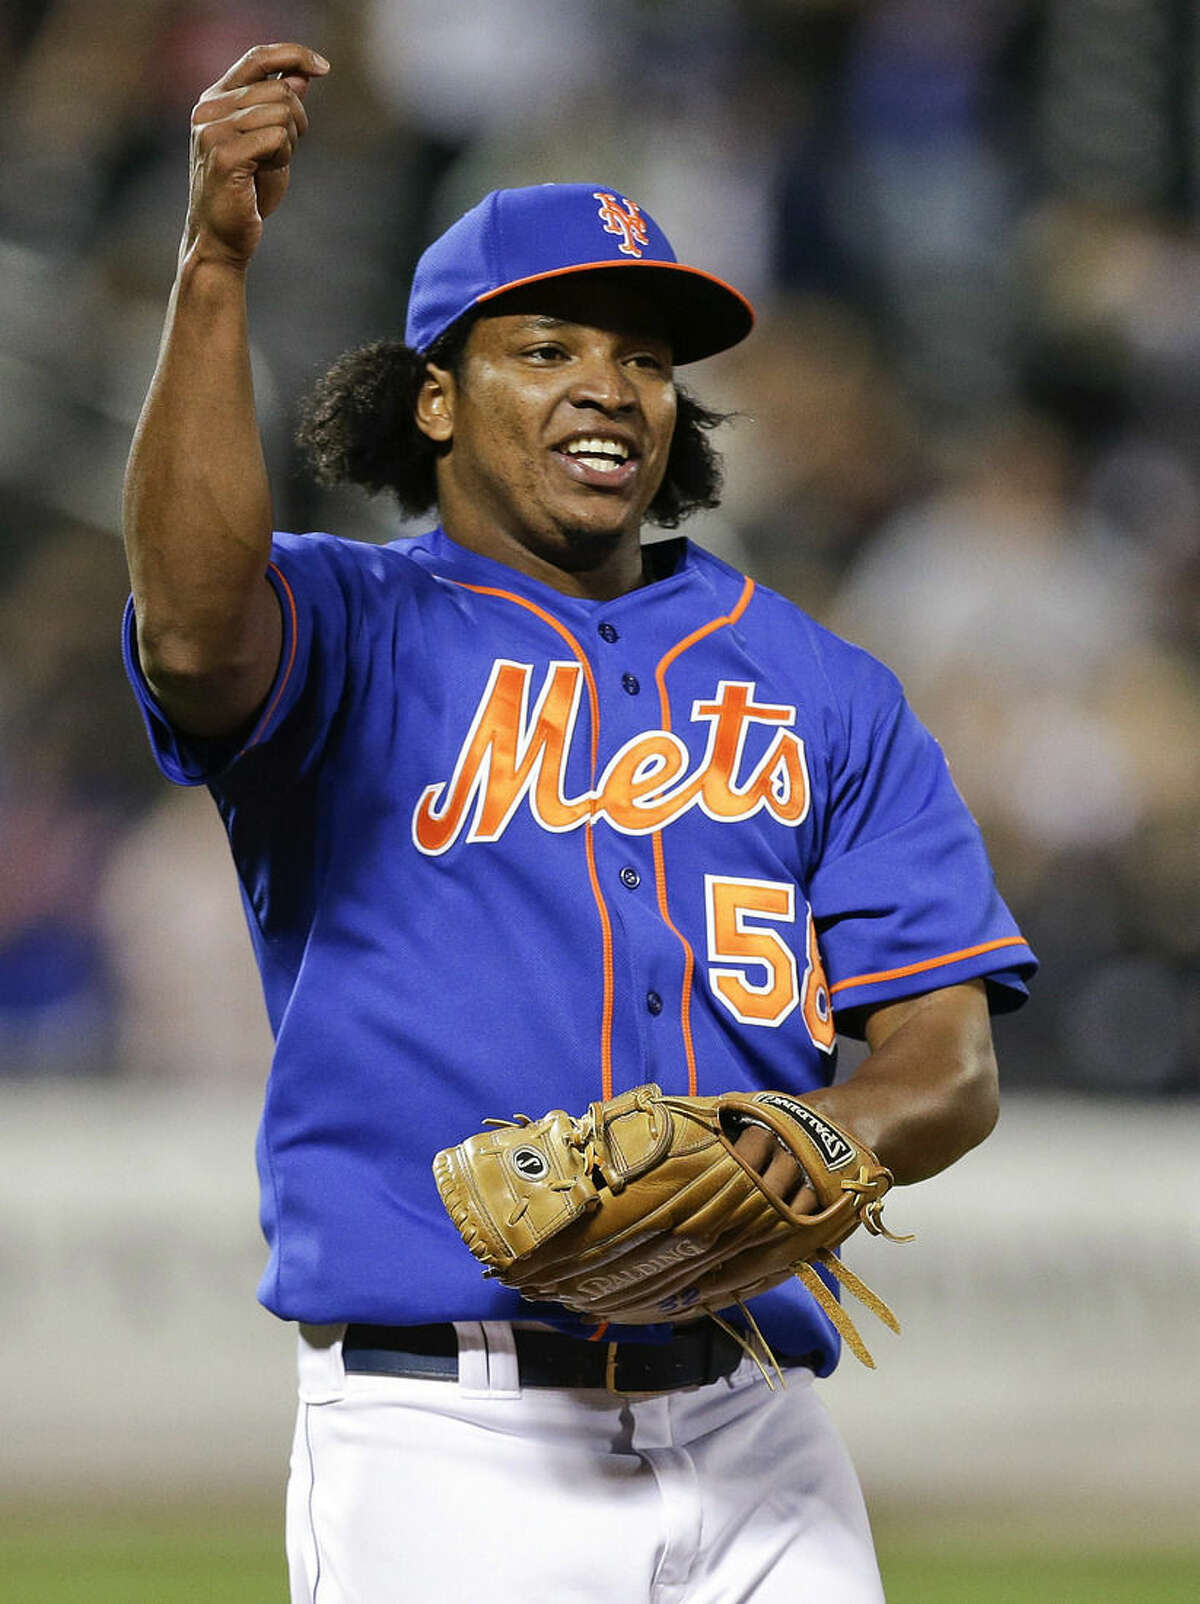 New York Mets relief pitcher Jenrry Mejia celebrates after the Mets defeated the Colorado Rockies 2-0 in a baseball game Wednesday, Sept. 10, 2014, in New York. (AP Photo/Frank Franklin II)